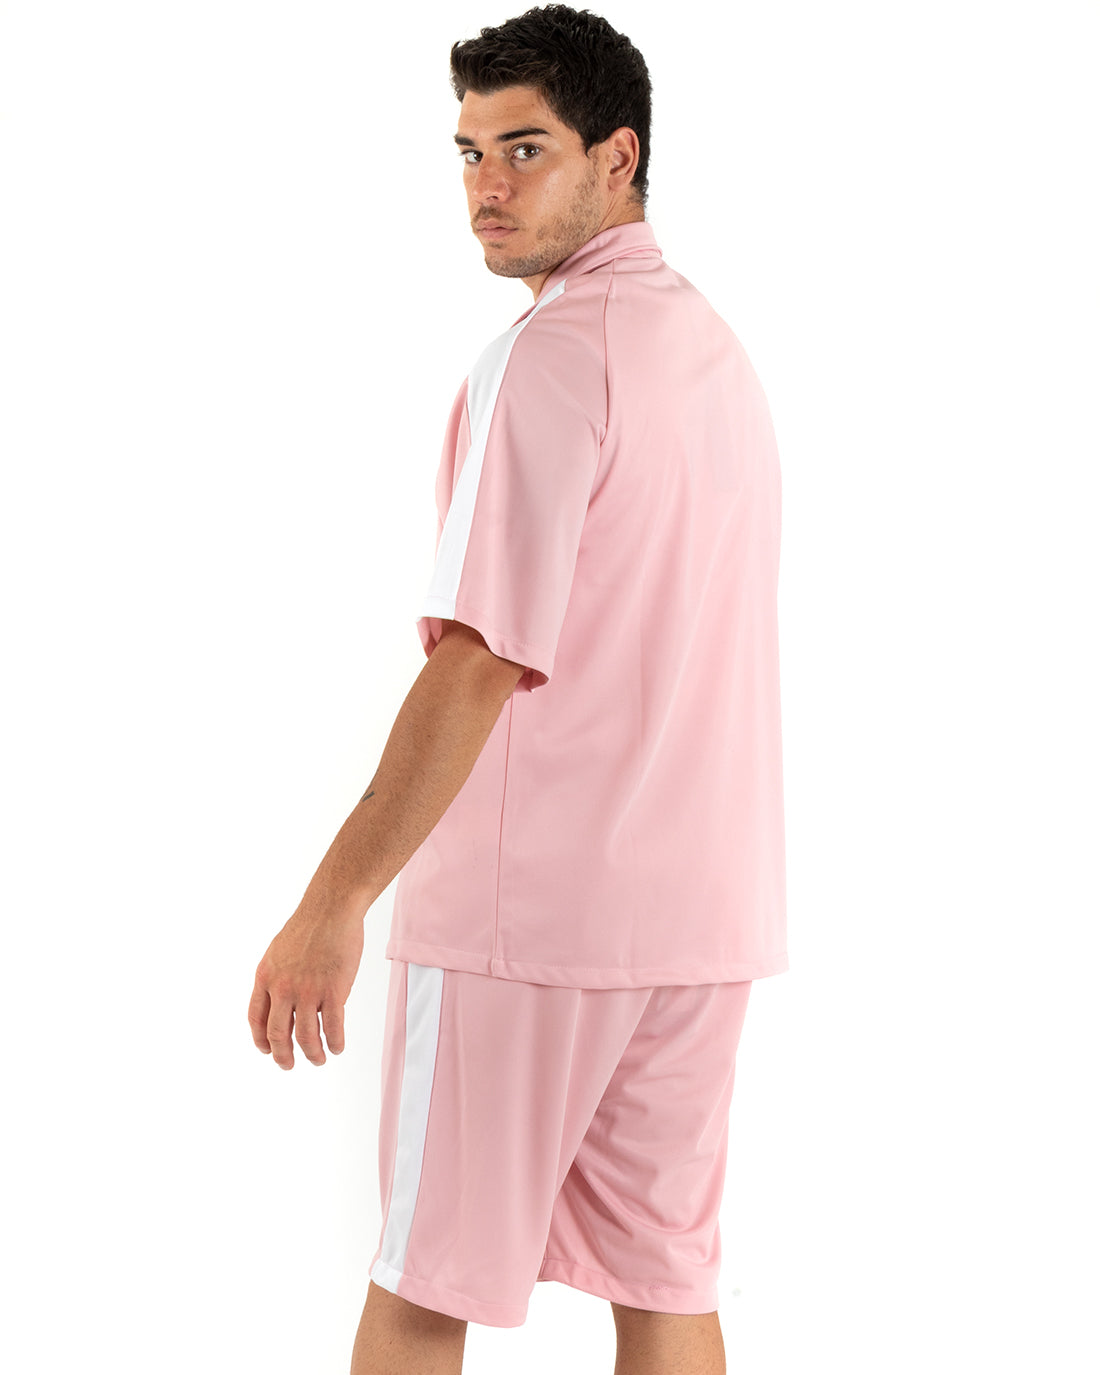 Complete Coordinated Set for Men Viscose Shirt with Bermuda Collar Outfit Pink GIOSAL-OU2363A